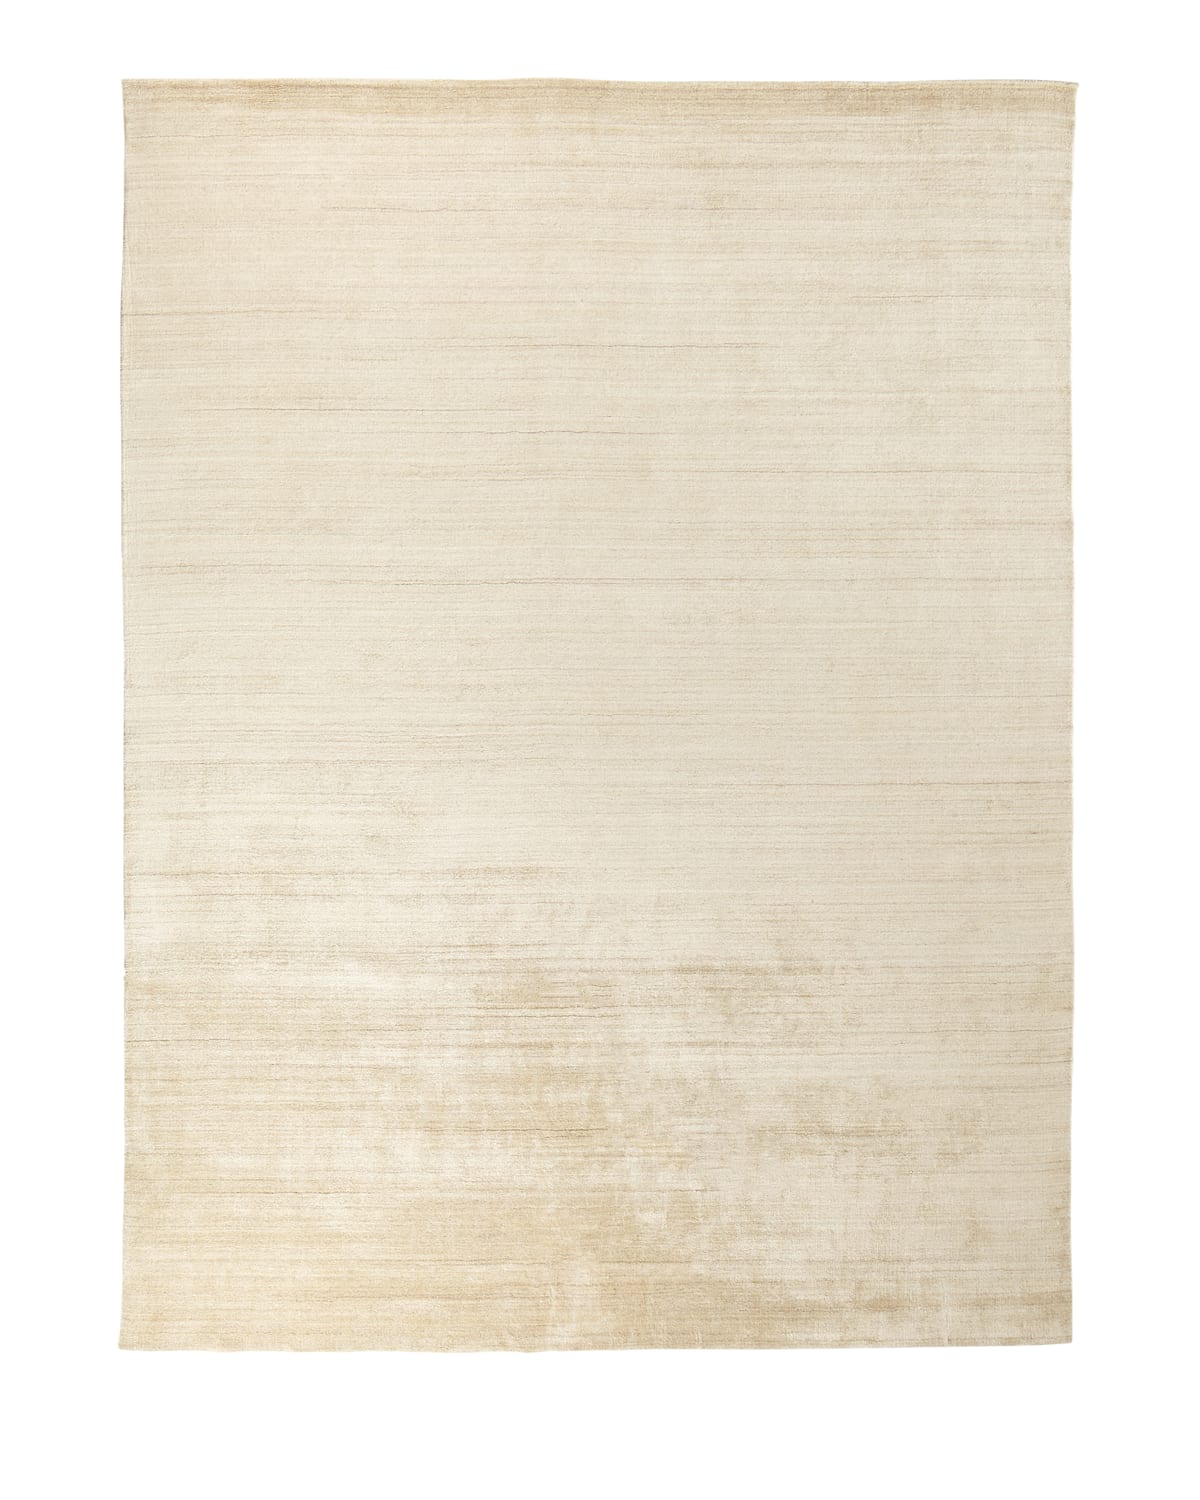 Exquisite Rugs Thames Rug, 10' X 14'